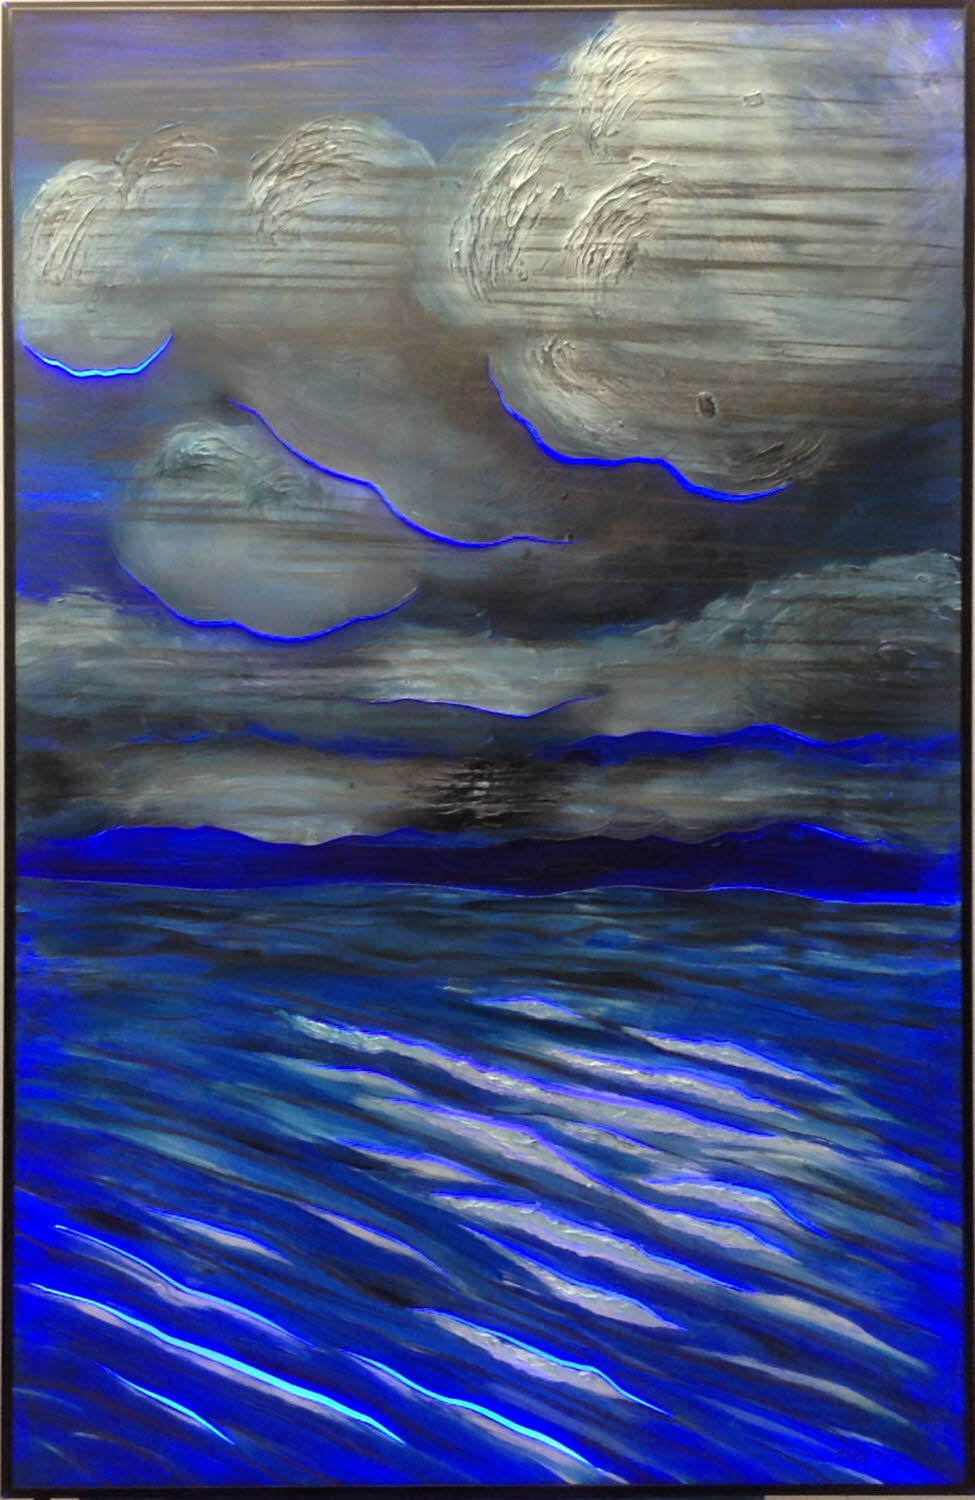 Waterstreem with LED lights, 2012, acrylic, graphite on cut synthetic paper, 40x26 inches